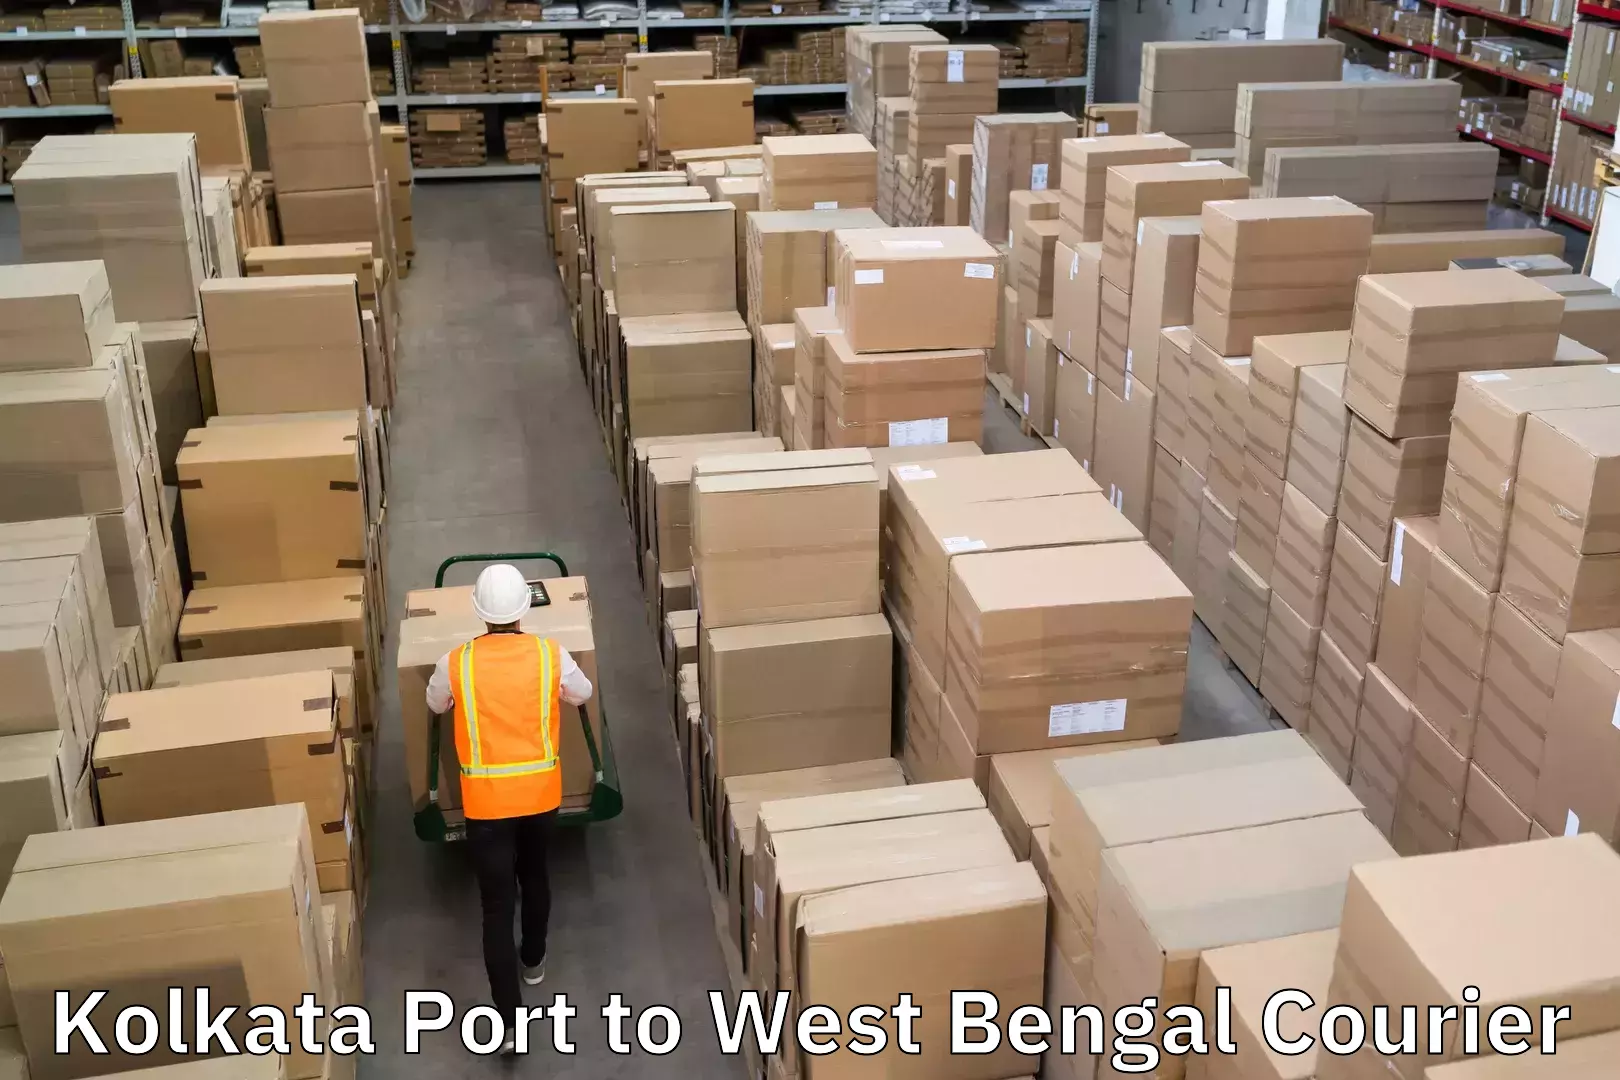 State-of-the-art courier technology Kolkata Port to West Bengal